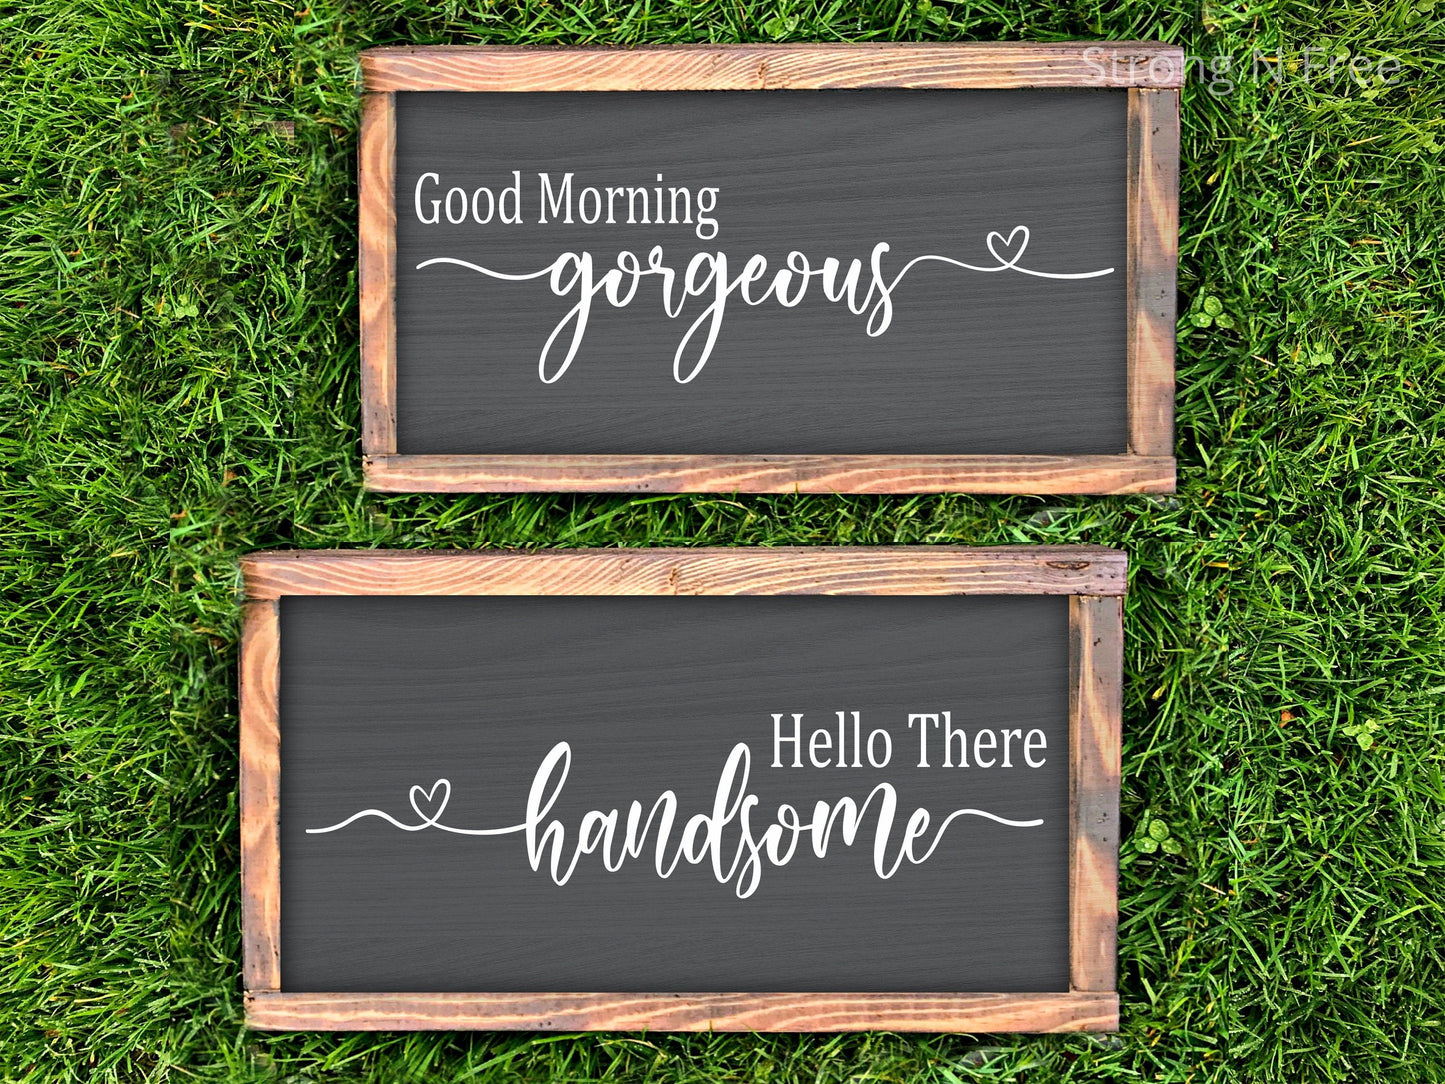 Hello Handsome Good Morning Gorgeous sign set - Good Morning Gorgeous Hello Handsome - Kitchen Signs - Wood Signs - Laundry Sign - Wood Sign